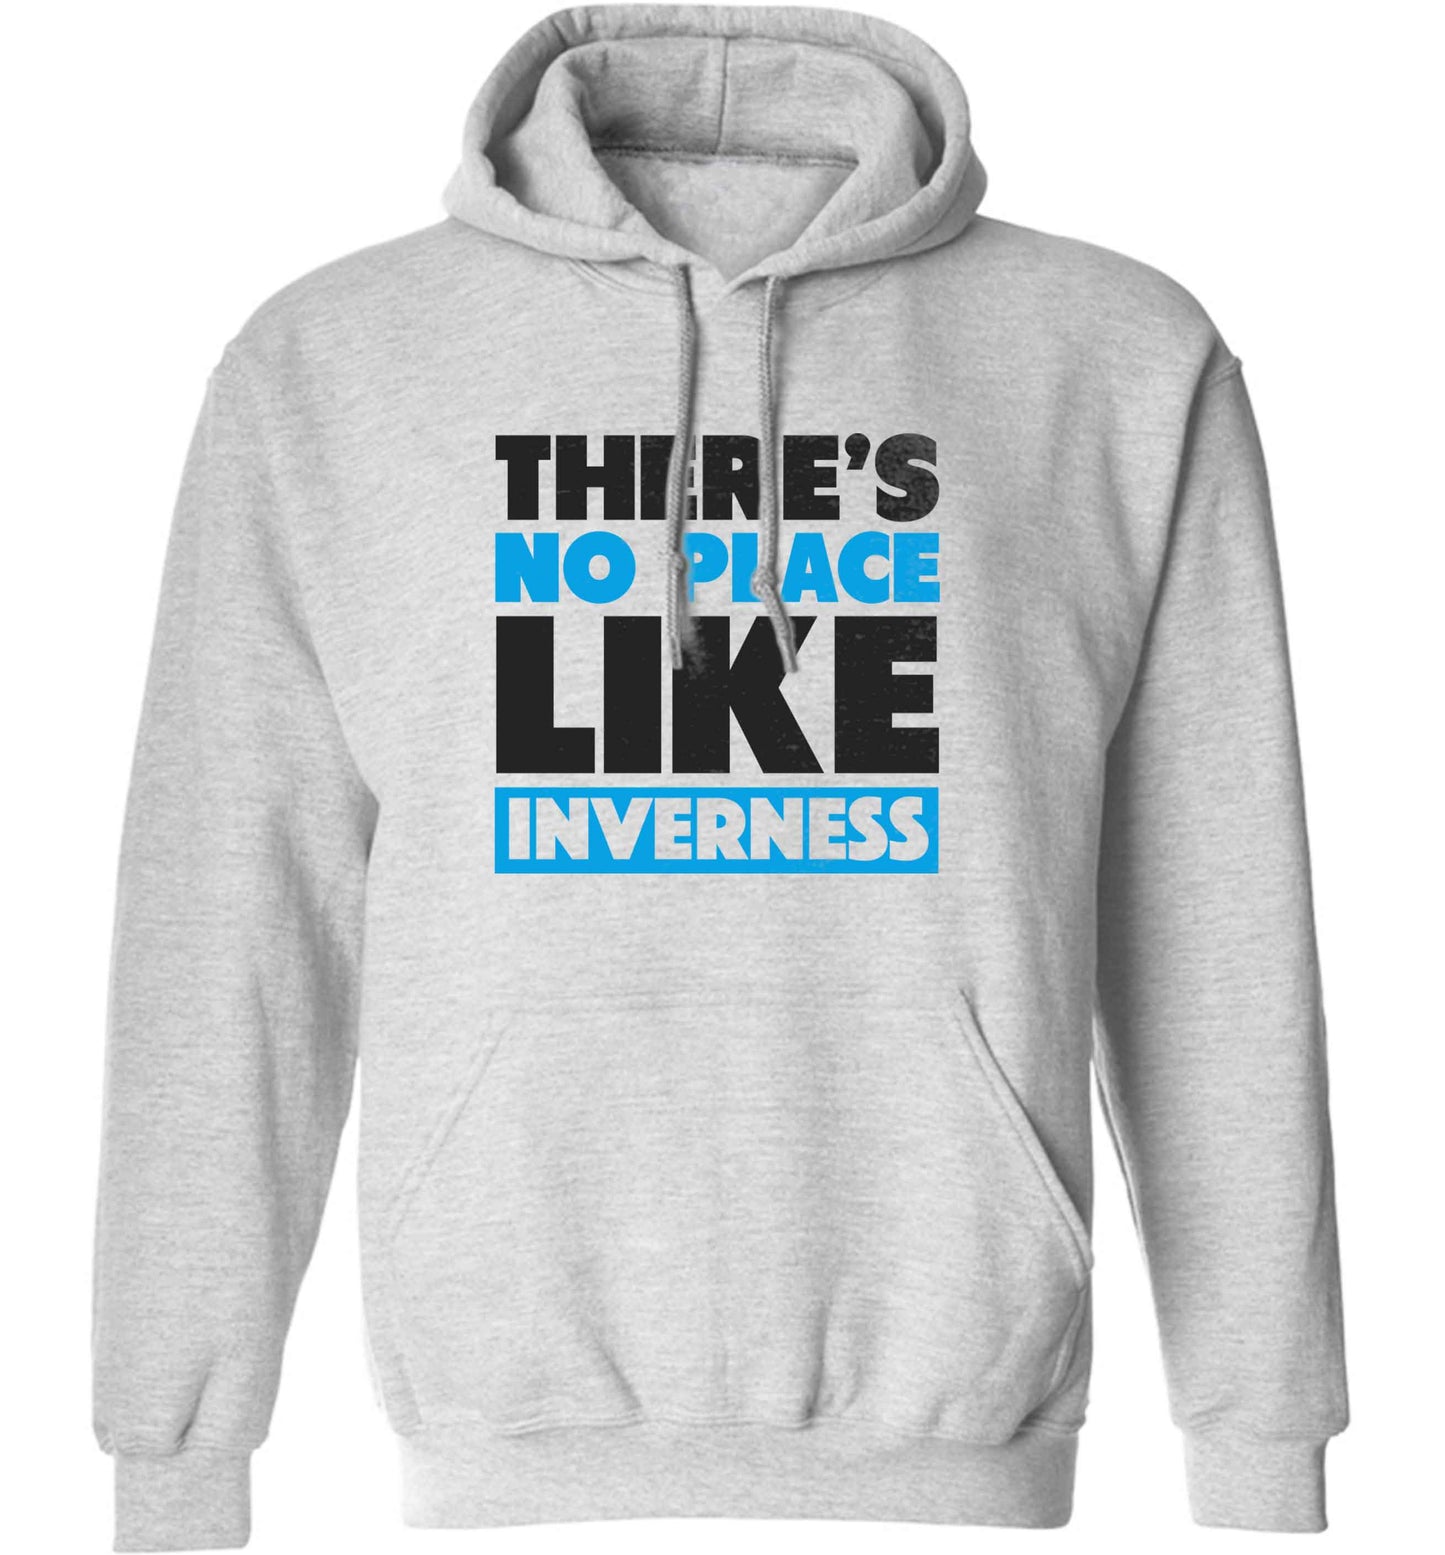 There's no place like Inverness adults unisex grey hoodie 2XL